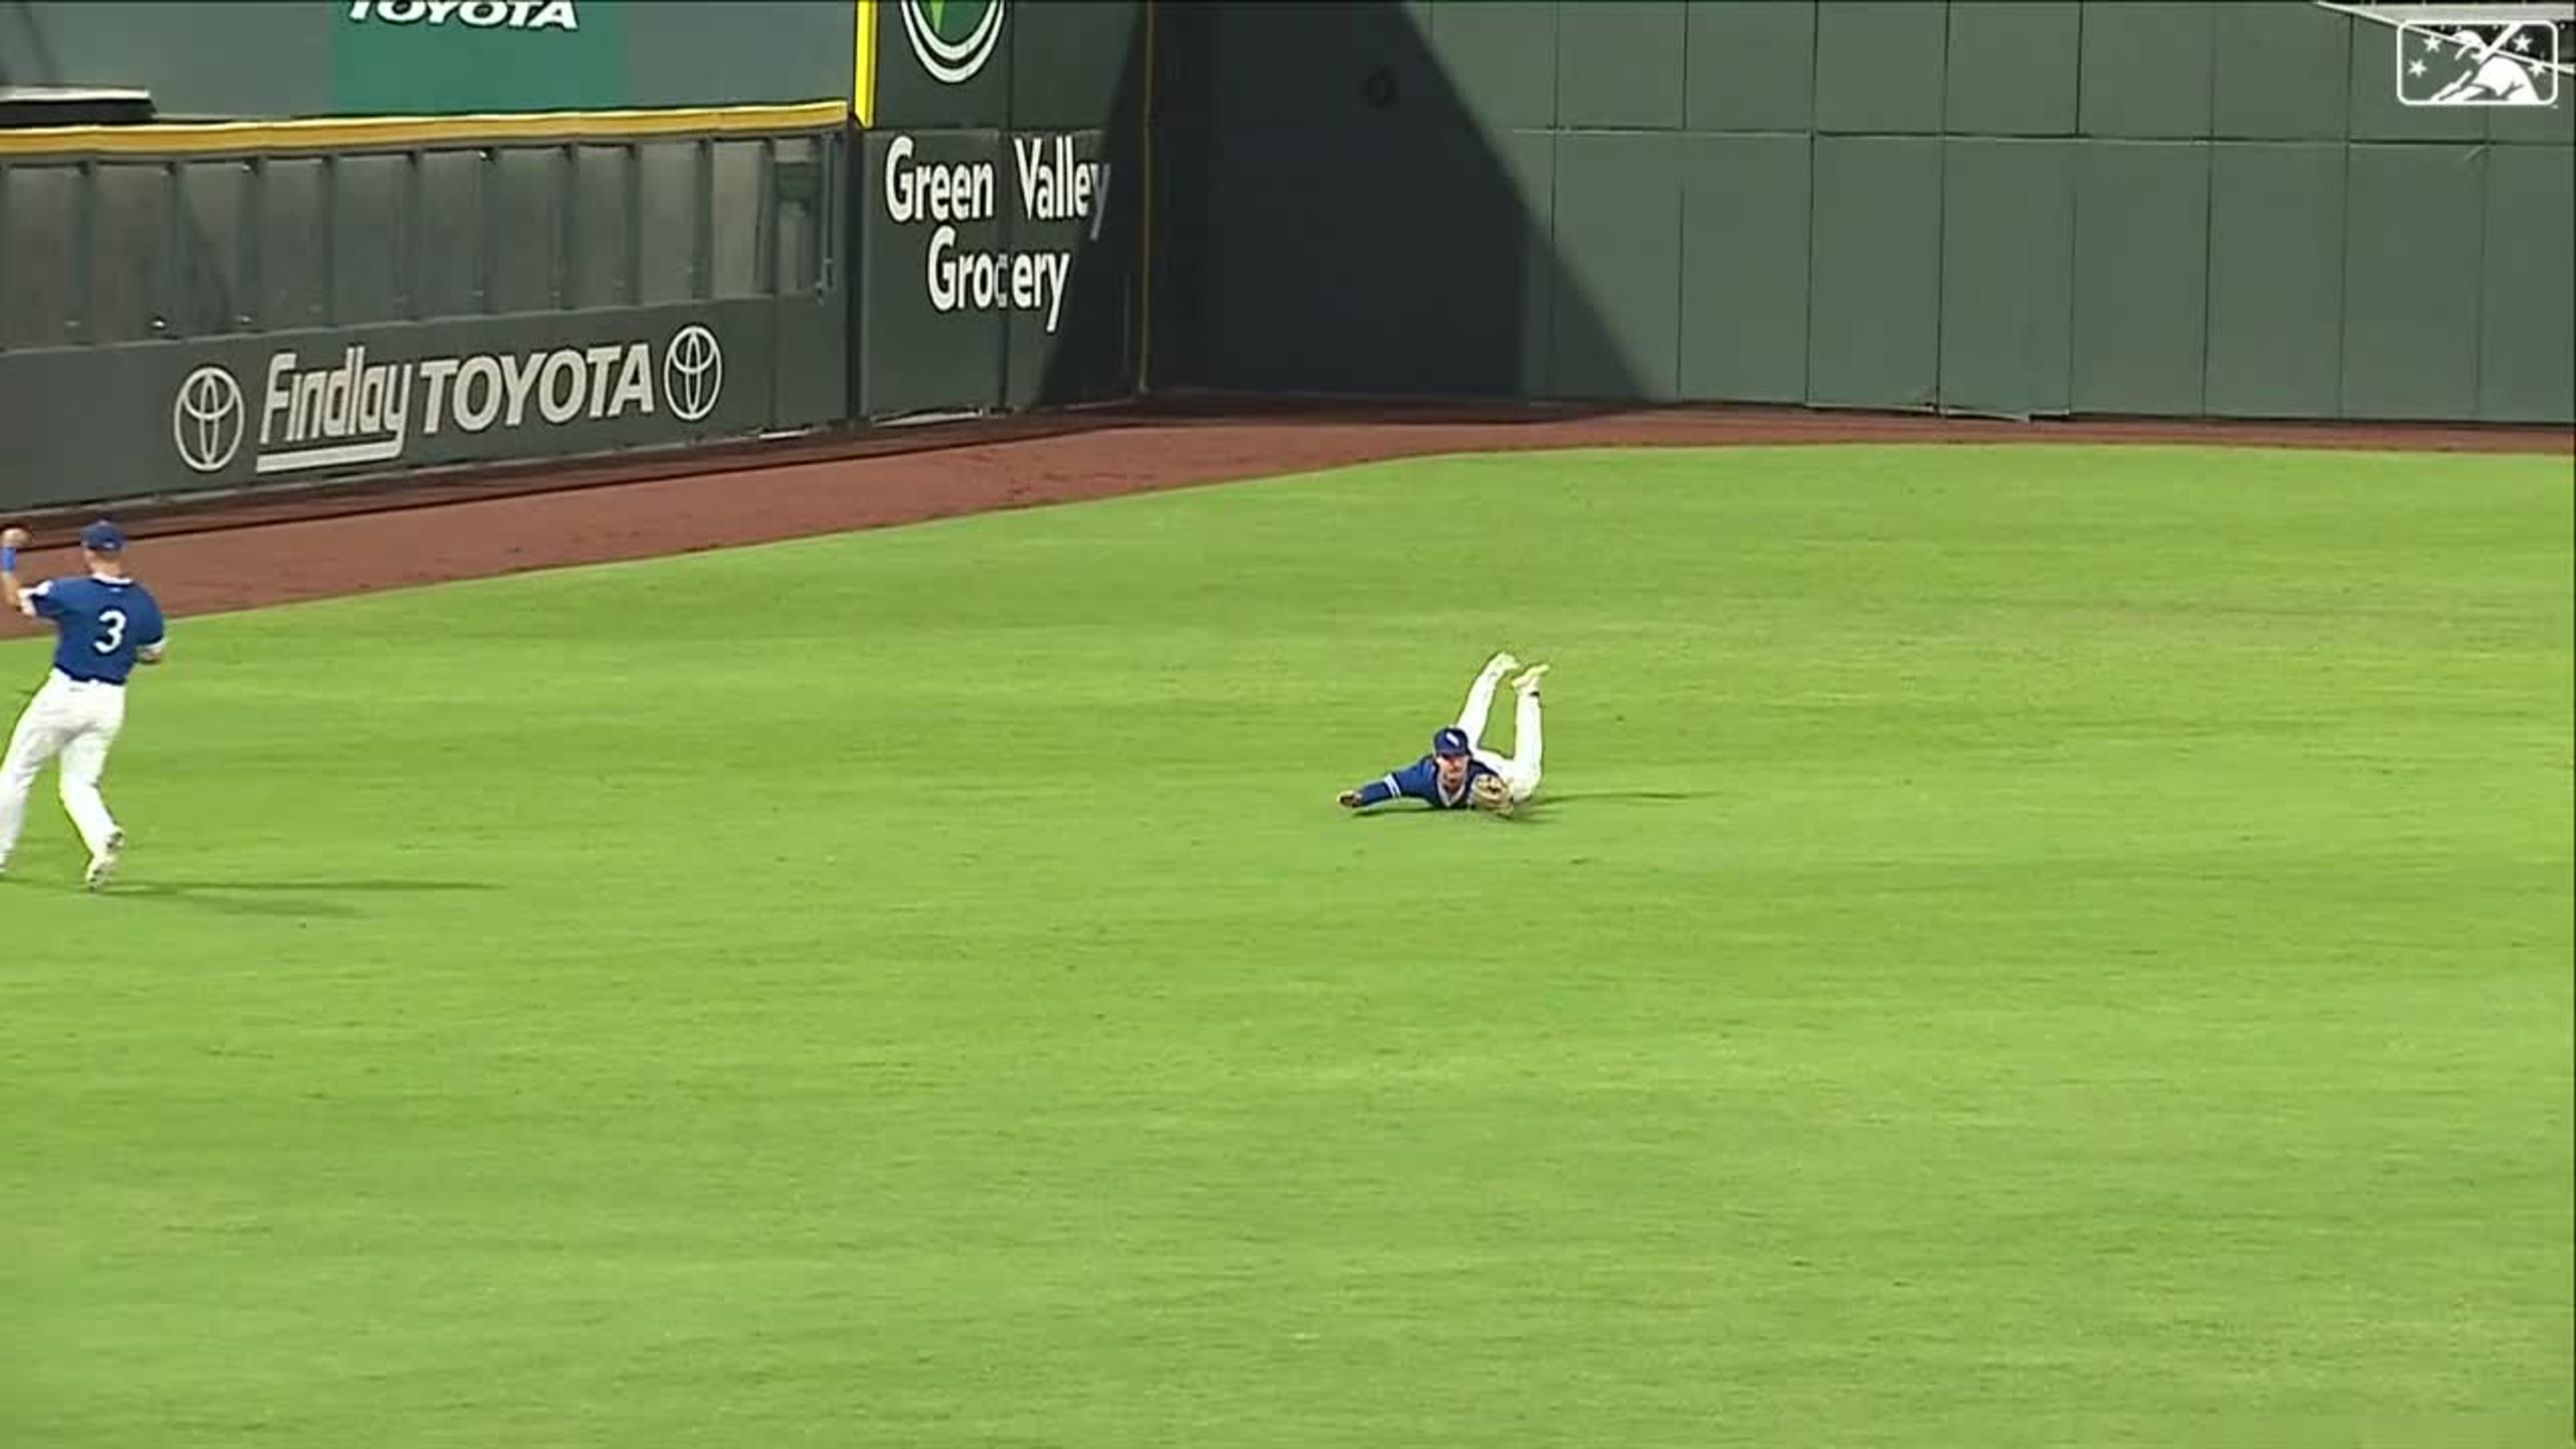 Jonny Deluca makes two incredible catches in a row in Dodgers' win